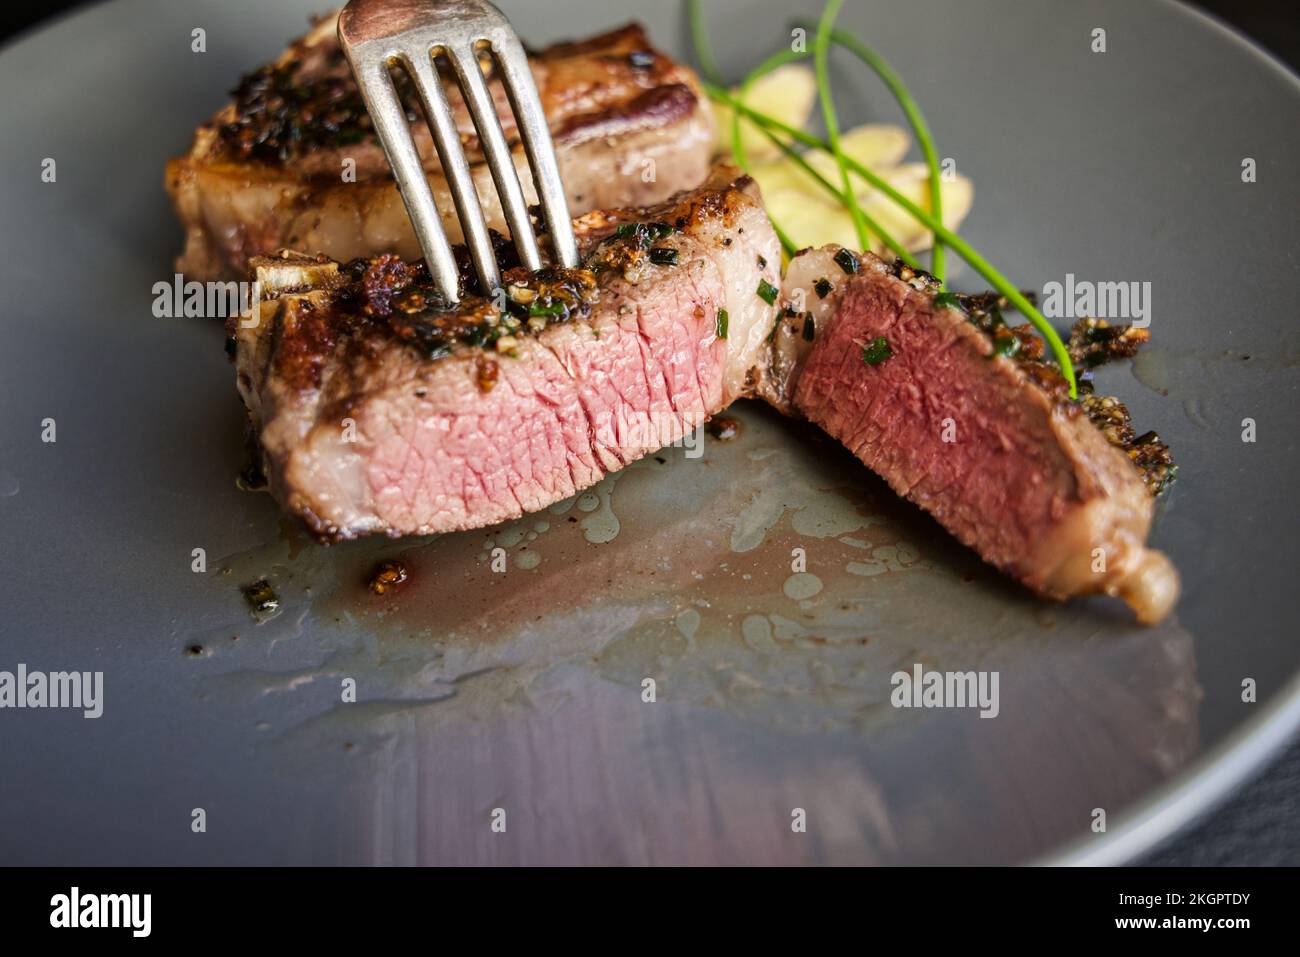 Cooked lamb chops, displayed on a plate with a classy herb and ginger garnish. Stock Photo